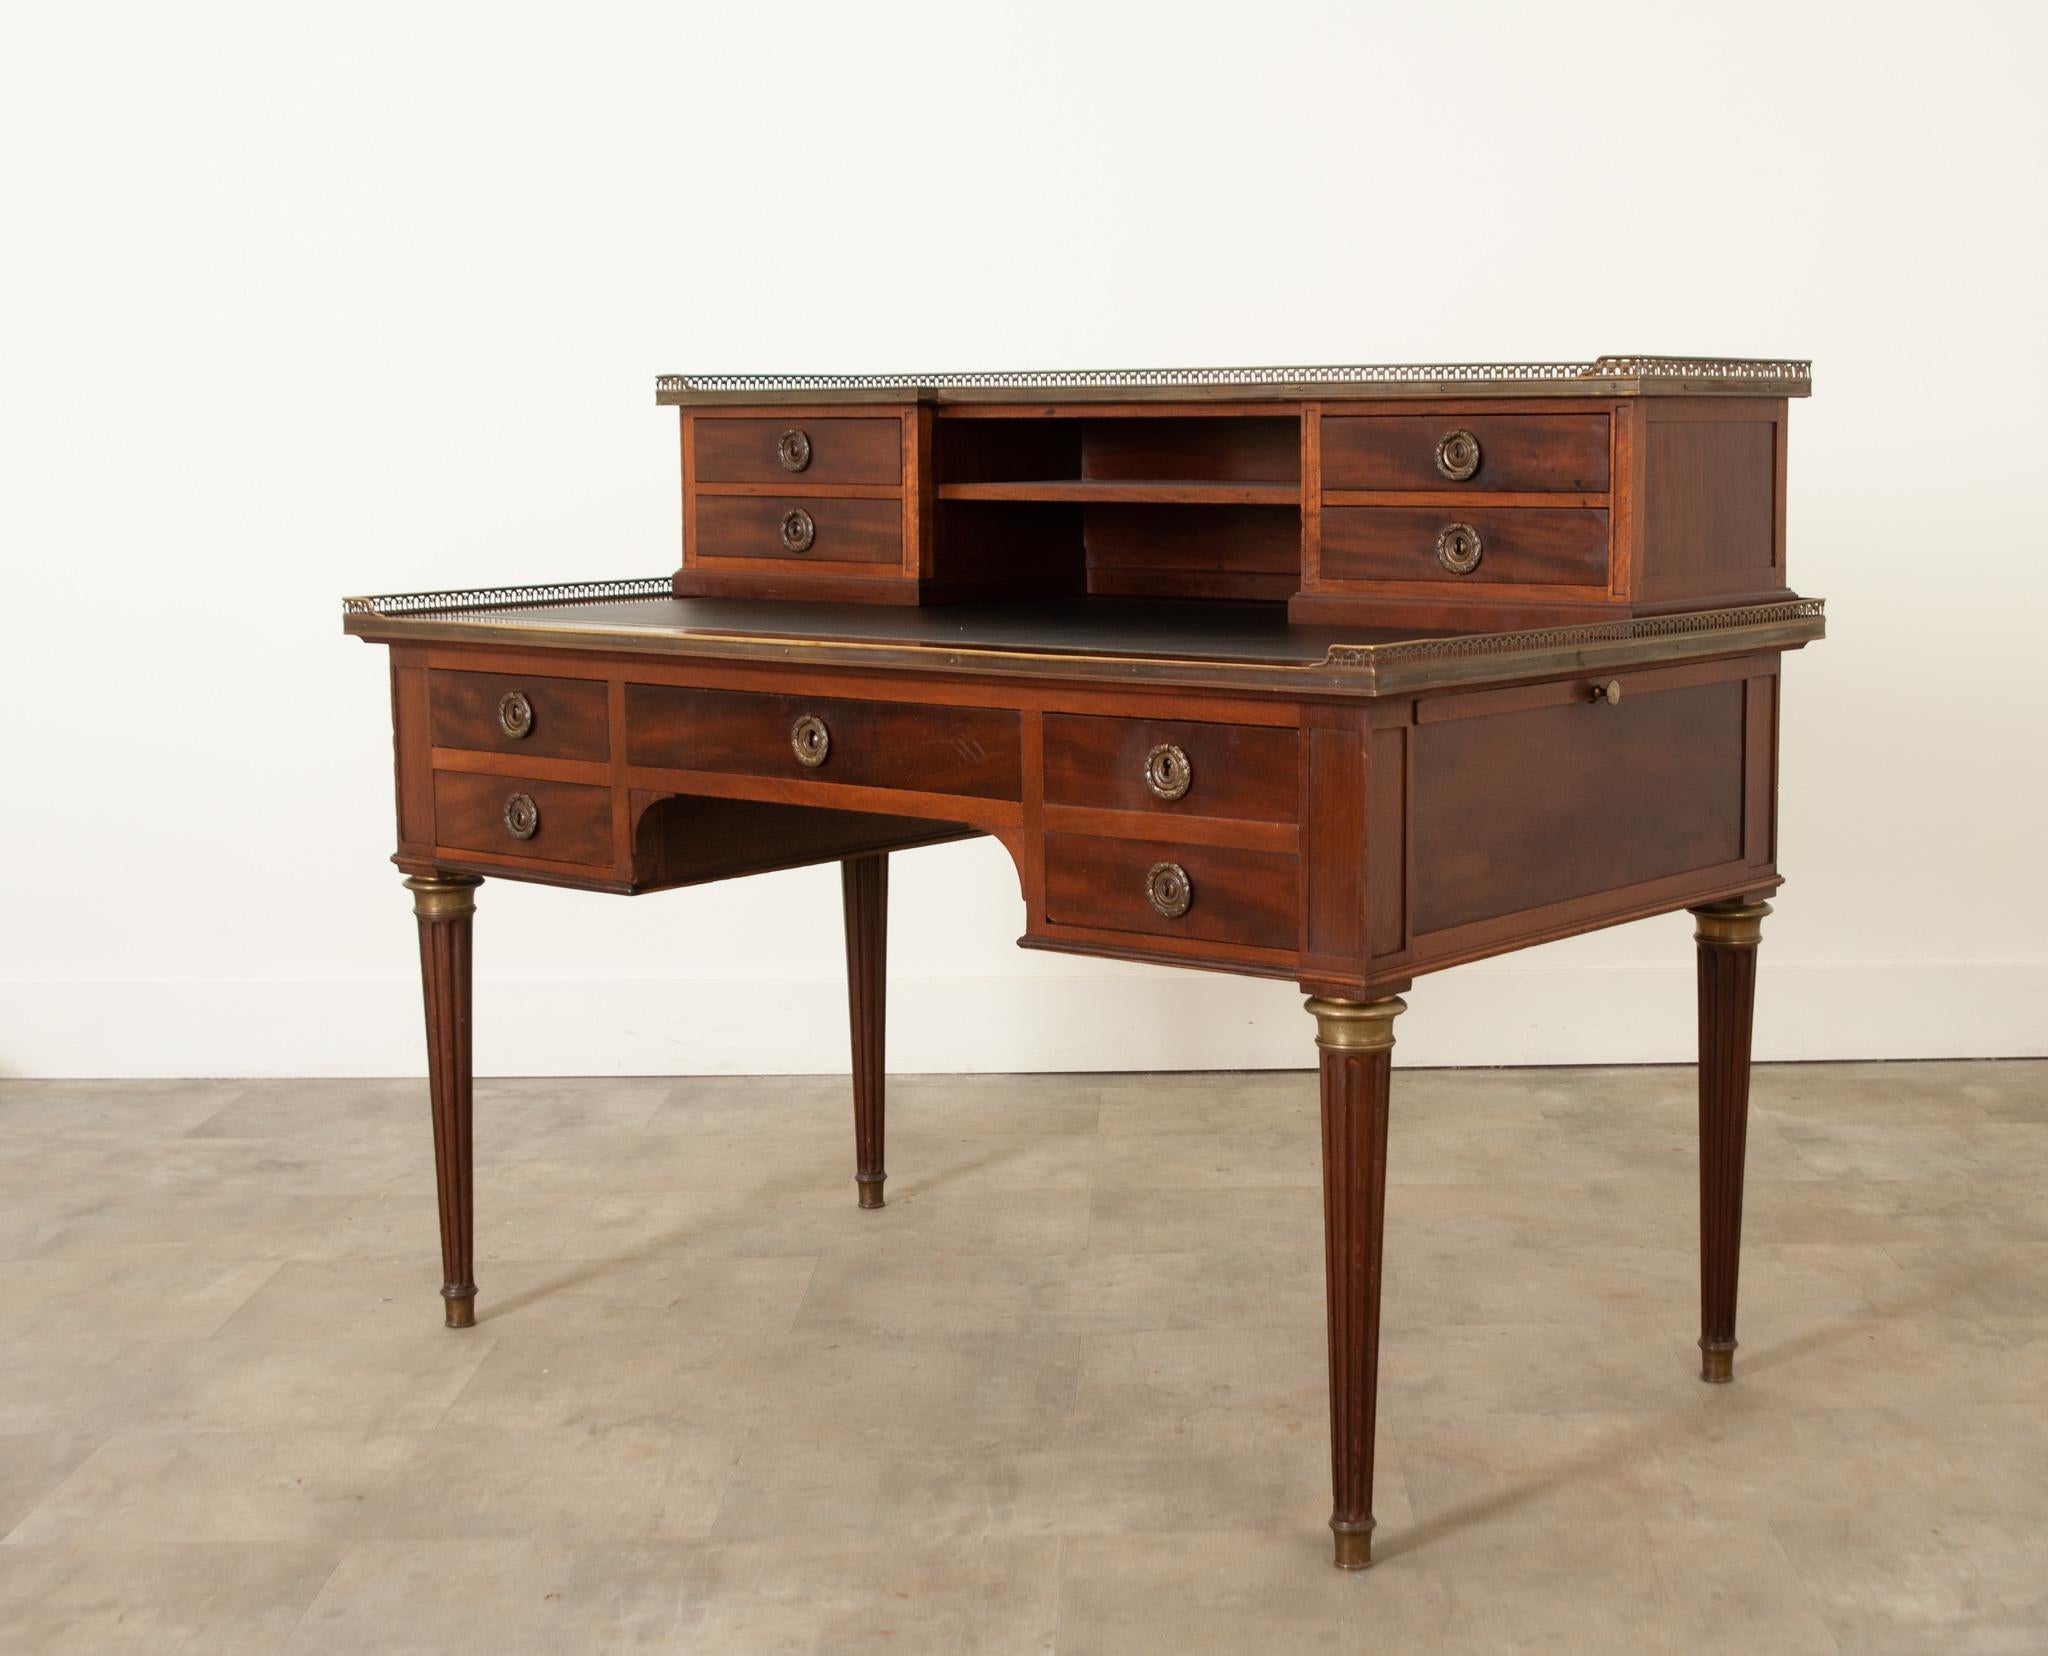 A wonderful mid-19th century French Louis XVI style mahogany desk hand-crafted in France circa 1850.  A beautiful, smooth top of flame mahogany is surrounded by a three quarter decorative brass gallery following down to two open center storage